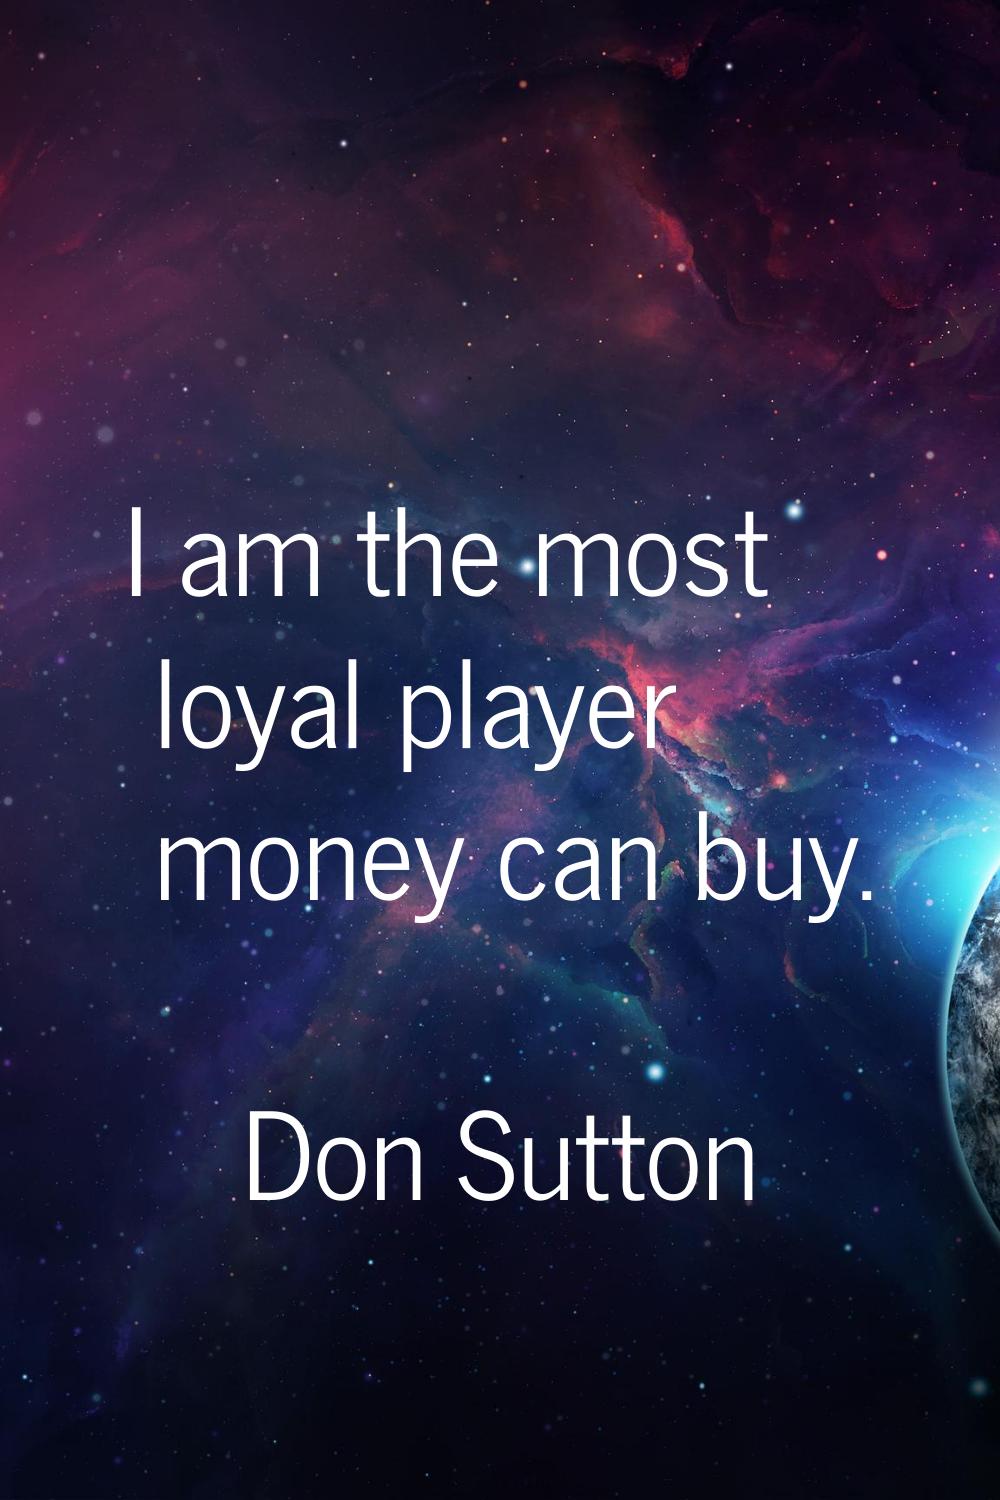 I am the most loyal player money can buy.